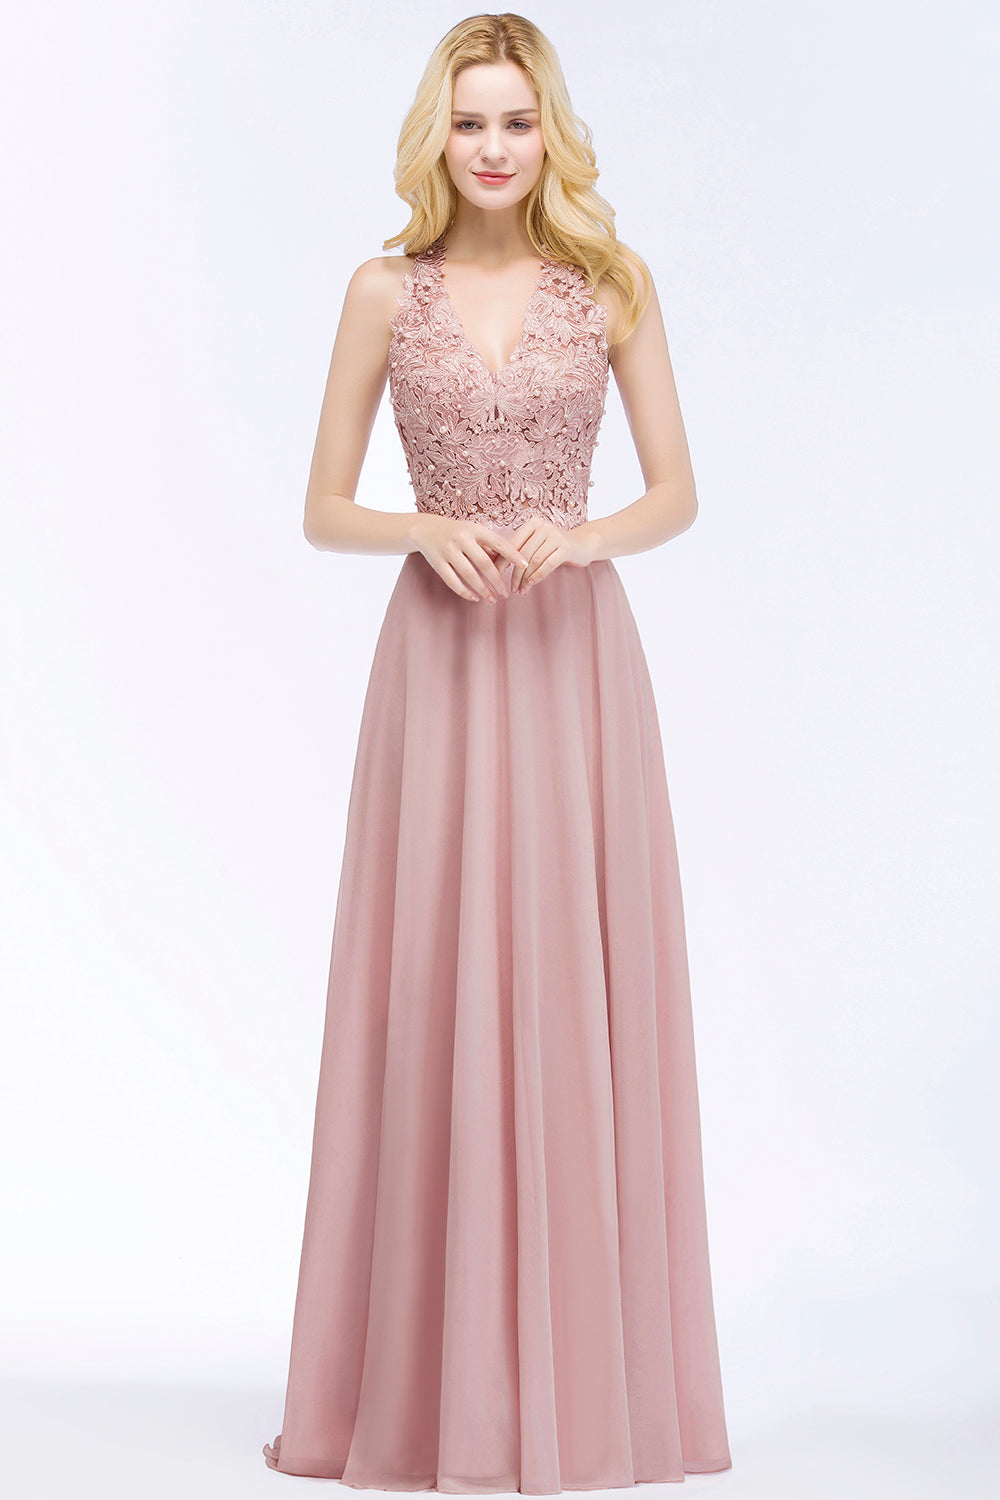 Chic Lace V-neck Pink Chiffon Bridesmaid Dress with Pearls